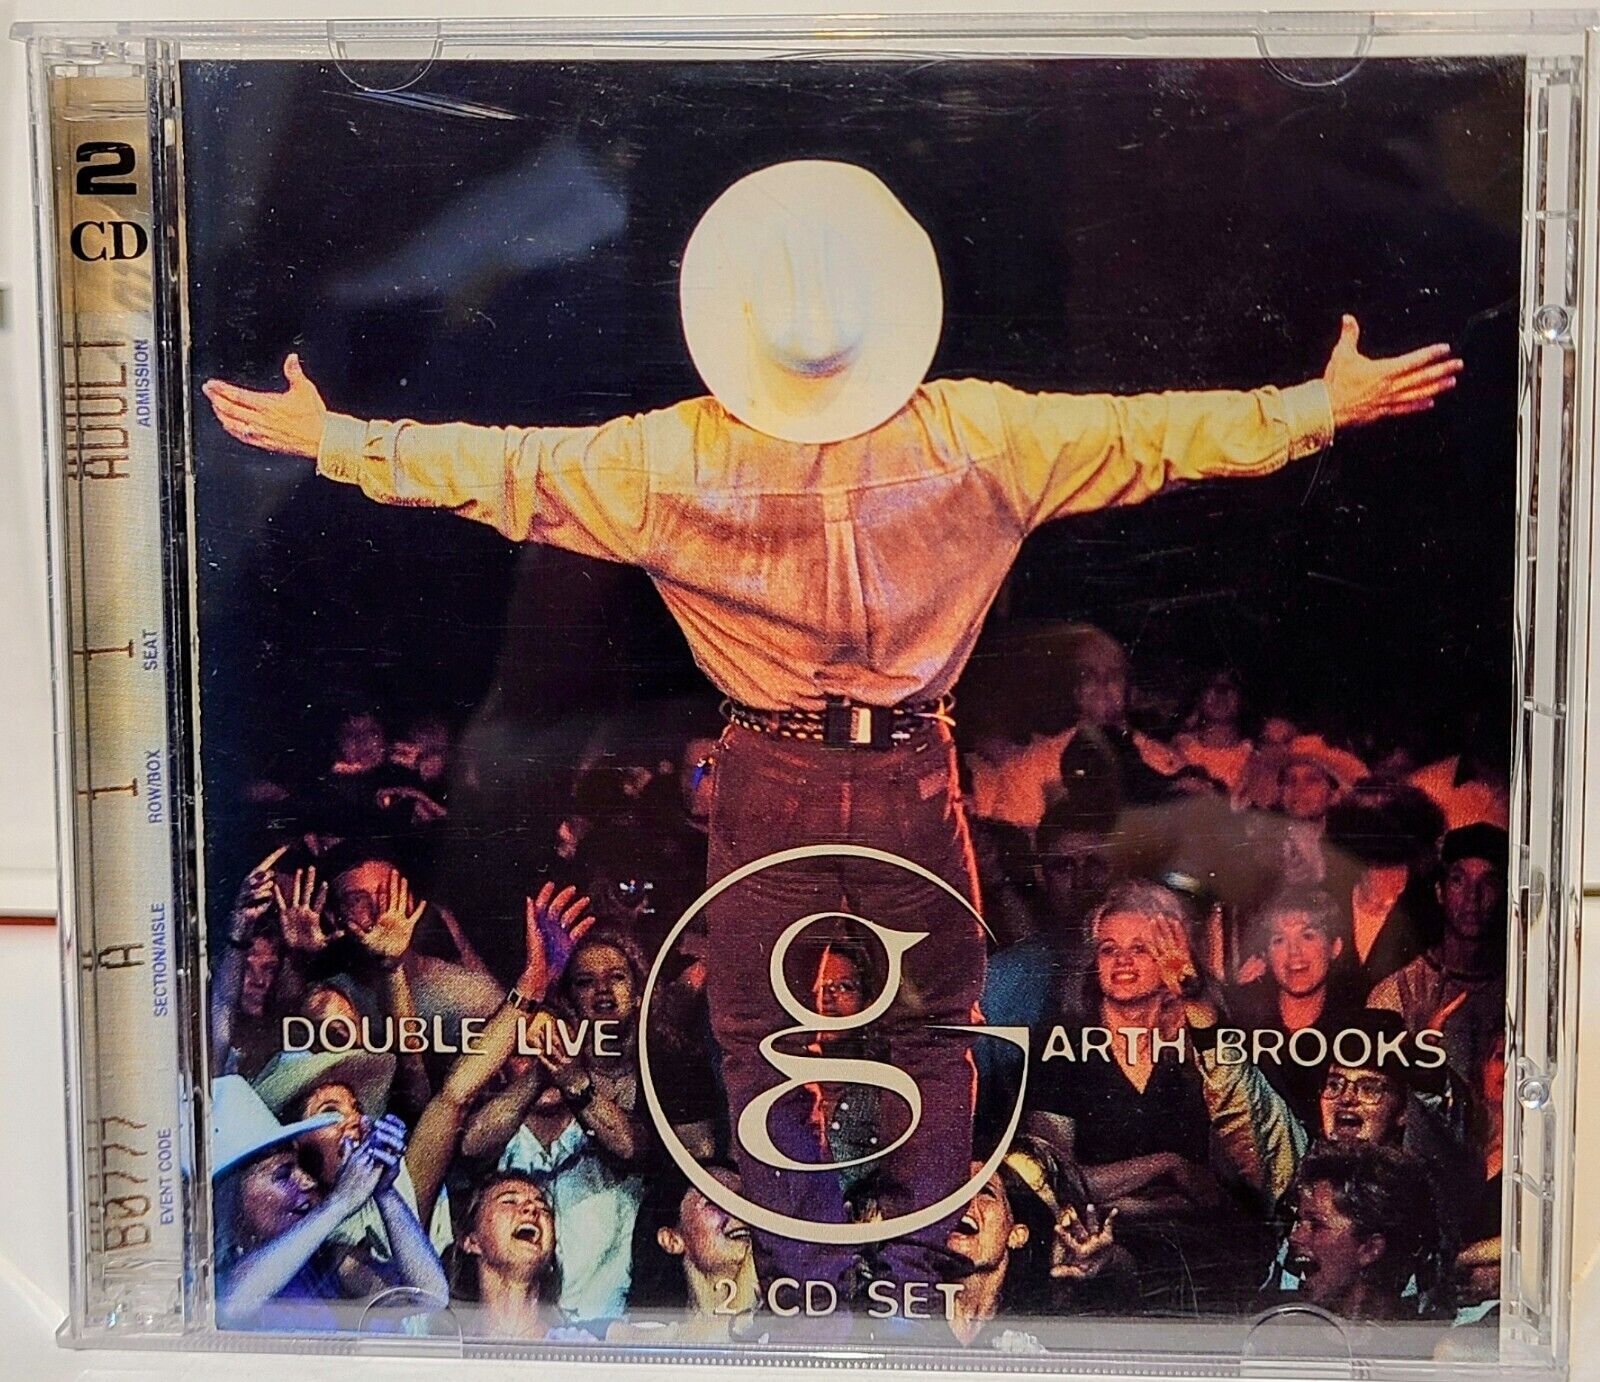 GARTH BROOKS DOUBLE LIVE CD LIMITED COMMEMORATIVE PACKAGE WORLD TOUR II  '95-'96